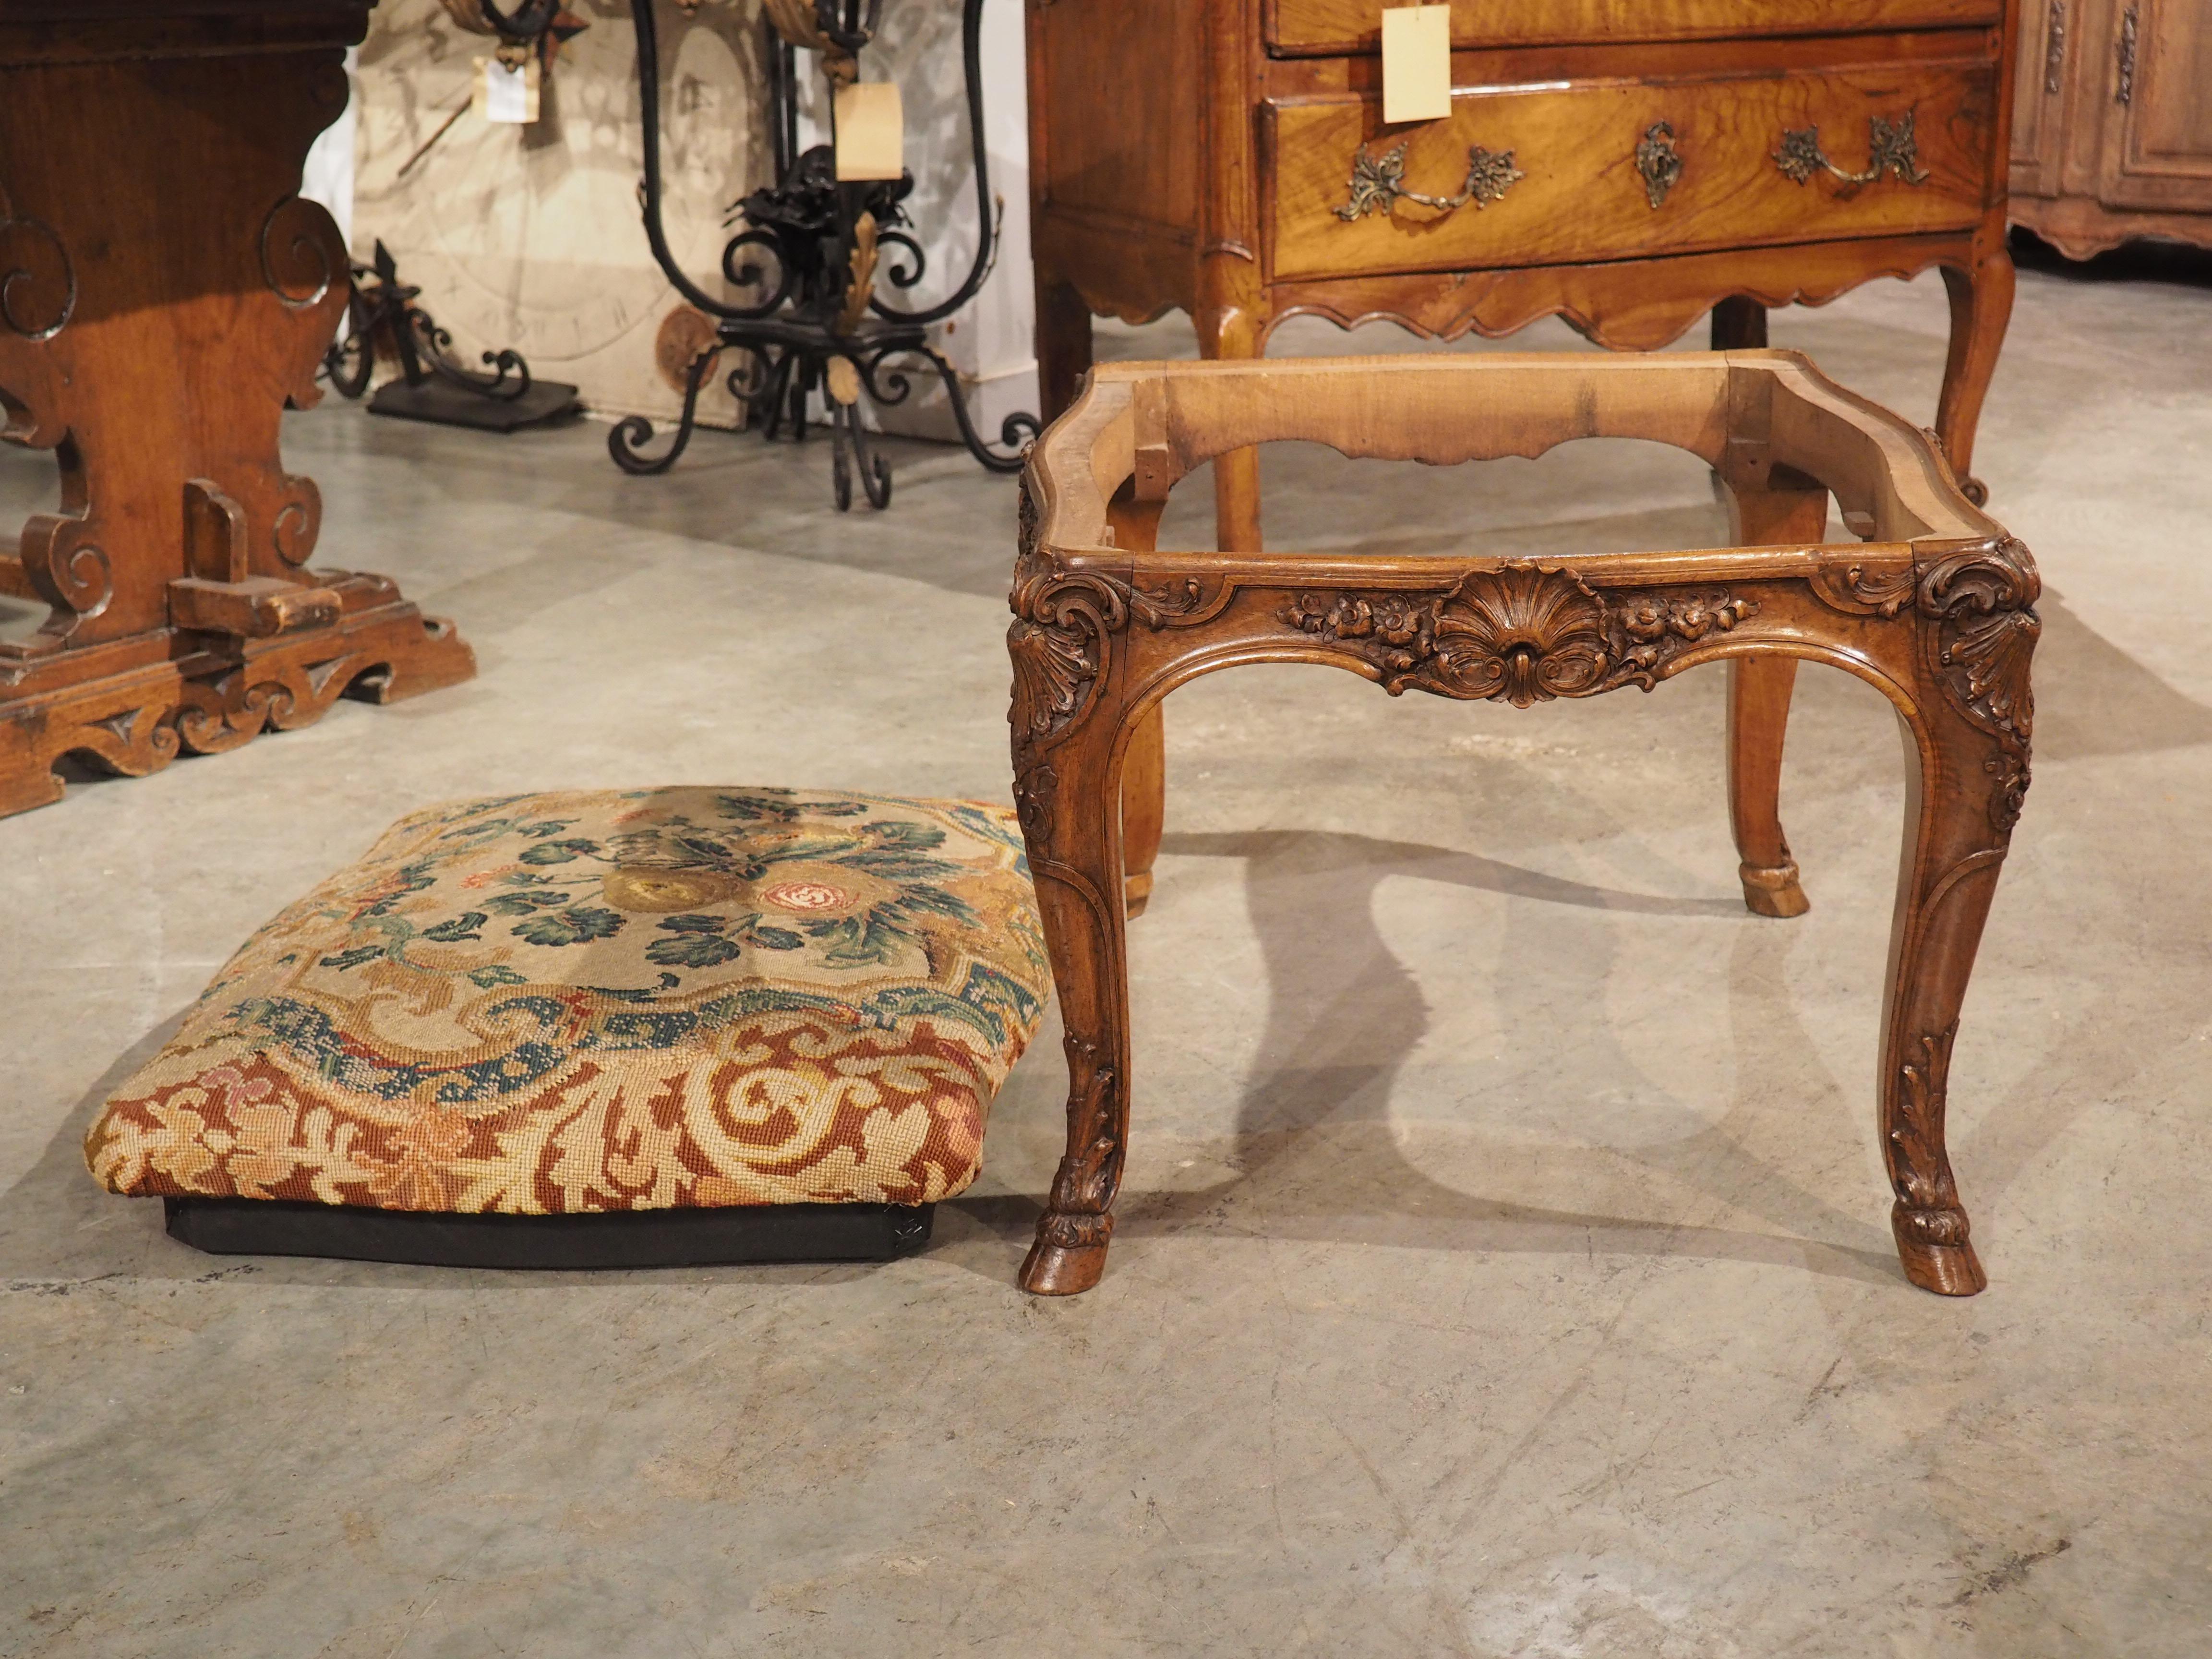 Hand-carved from rich walnut wood in France during the 1800s, this Regence-style tabouret has a production stamp under the seat that reads “A. Dubois Sculpteur-Ebeniste Le Mans”. The Regence was a transitional period in French history, sandwiched